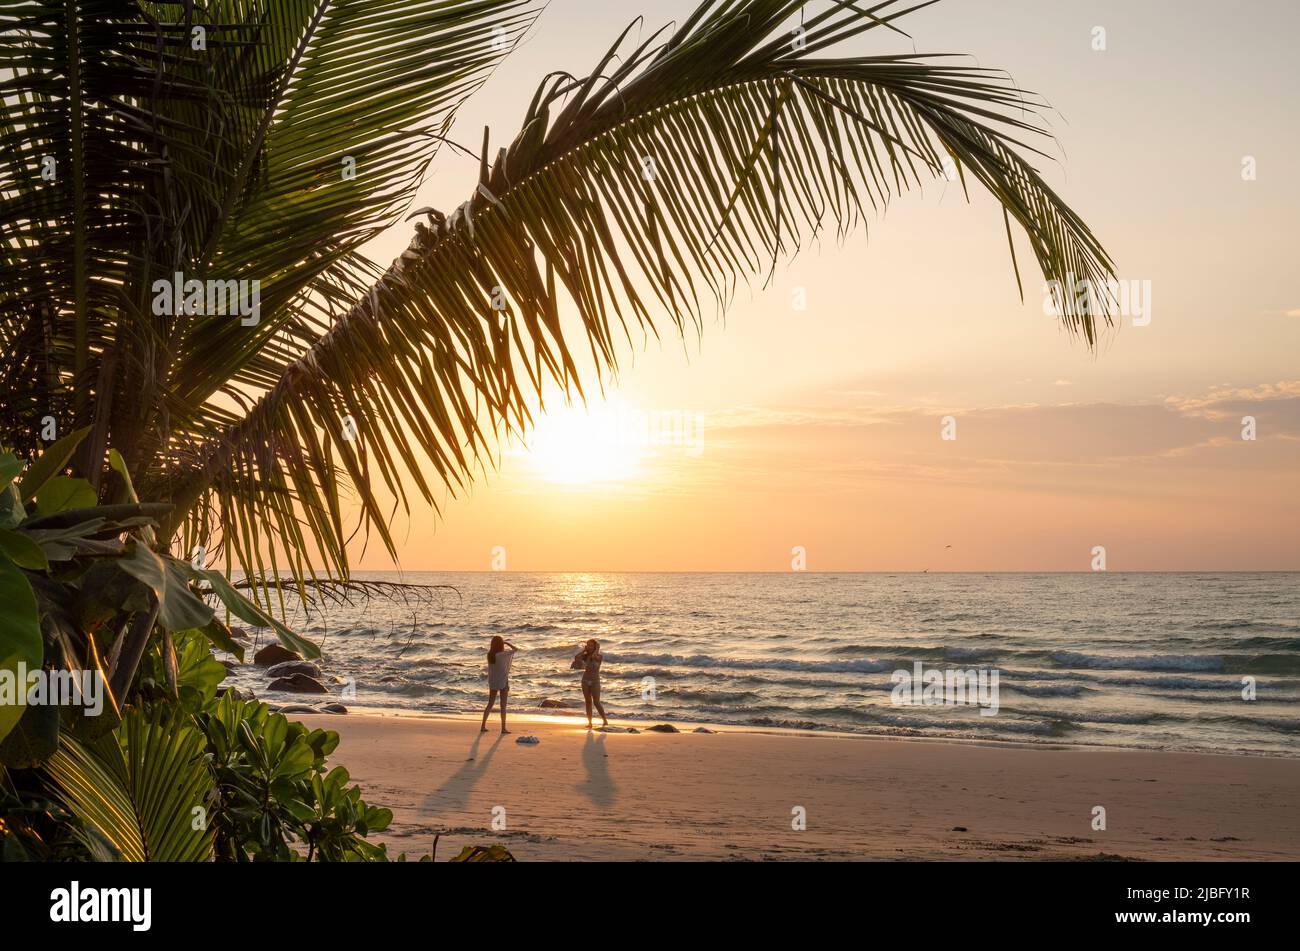 Palm tree and women on beach at sunset Stock Photo